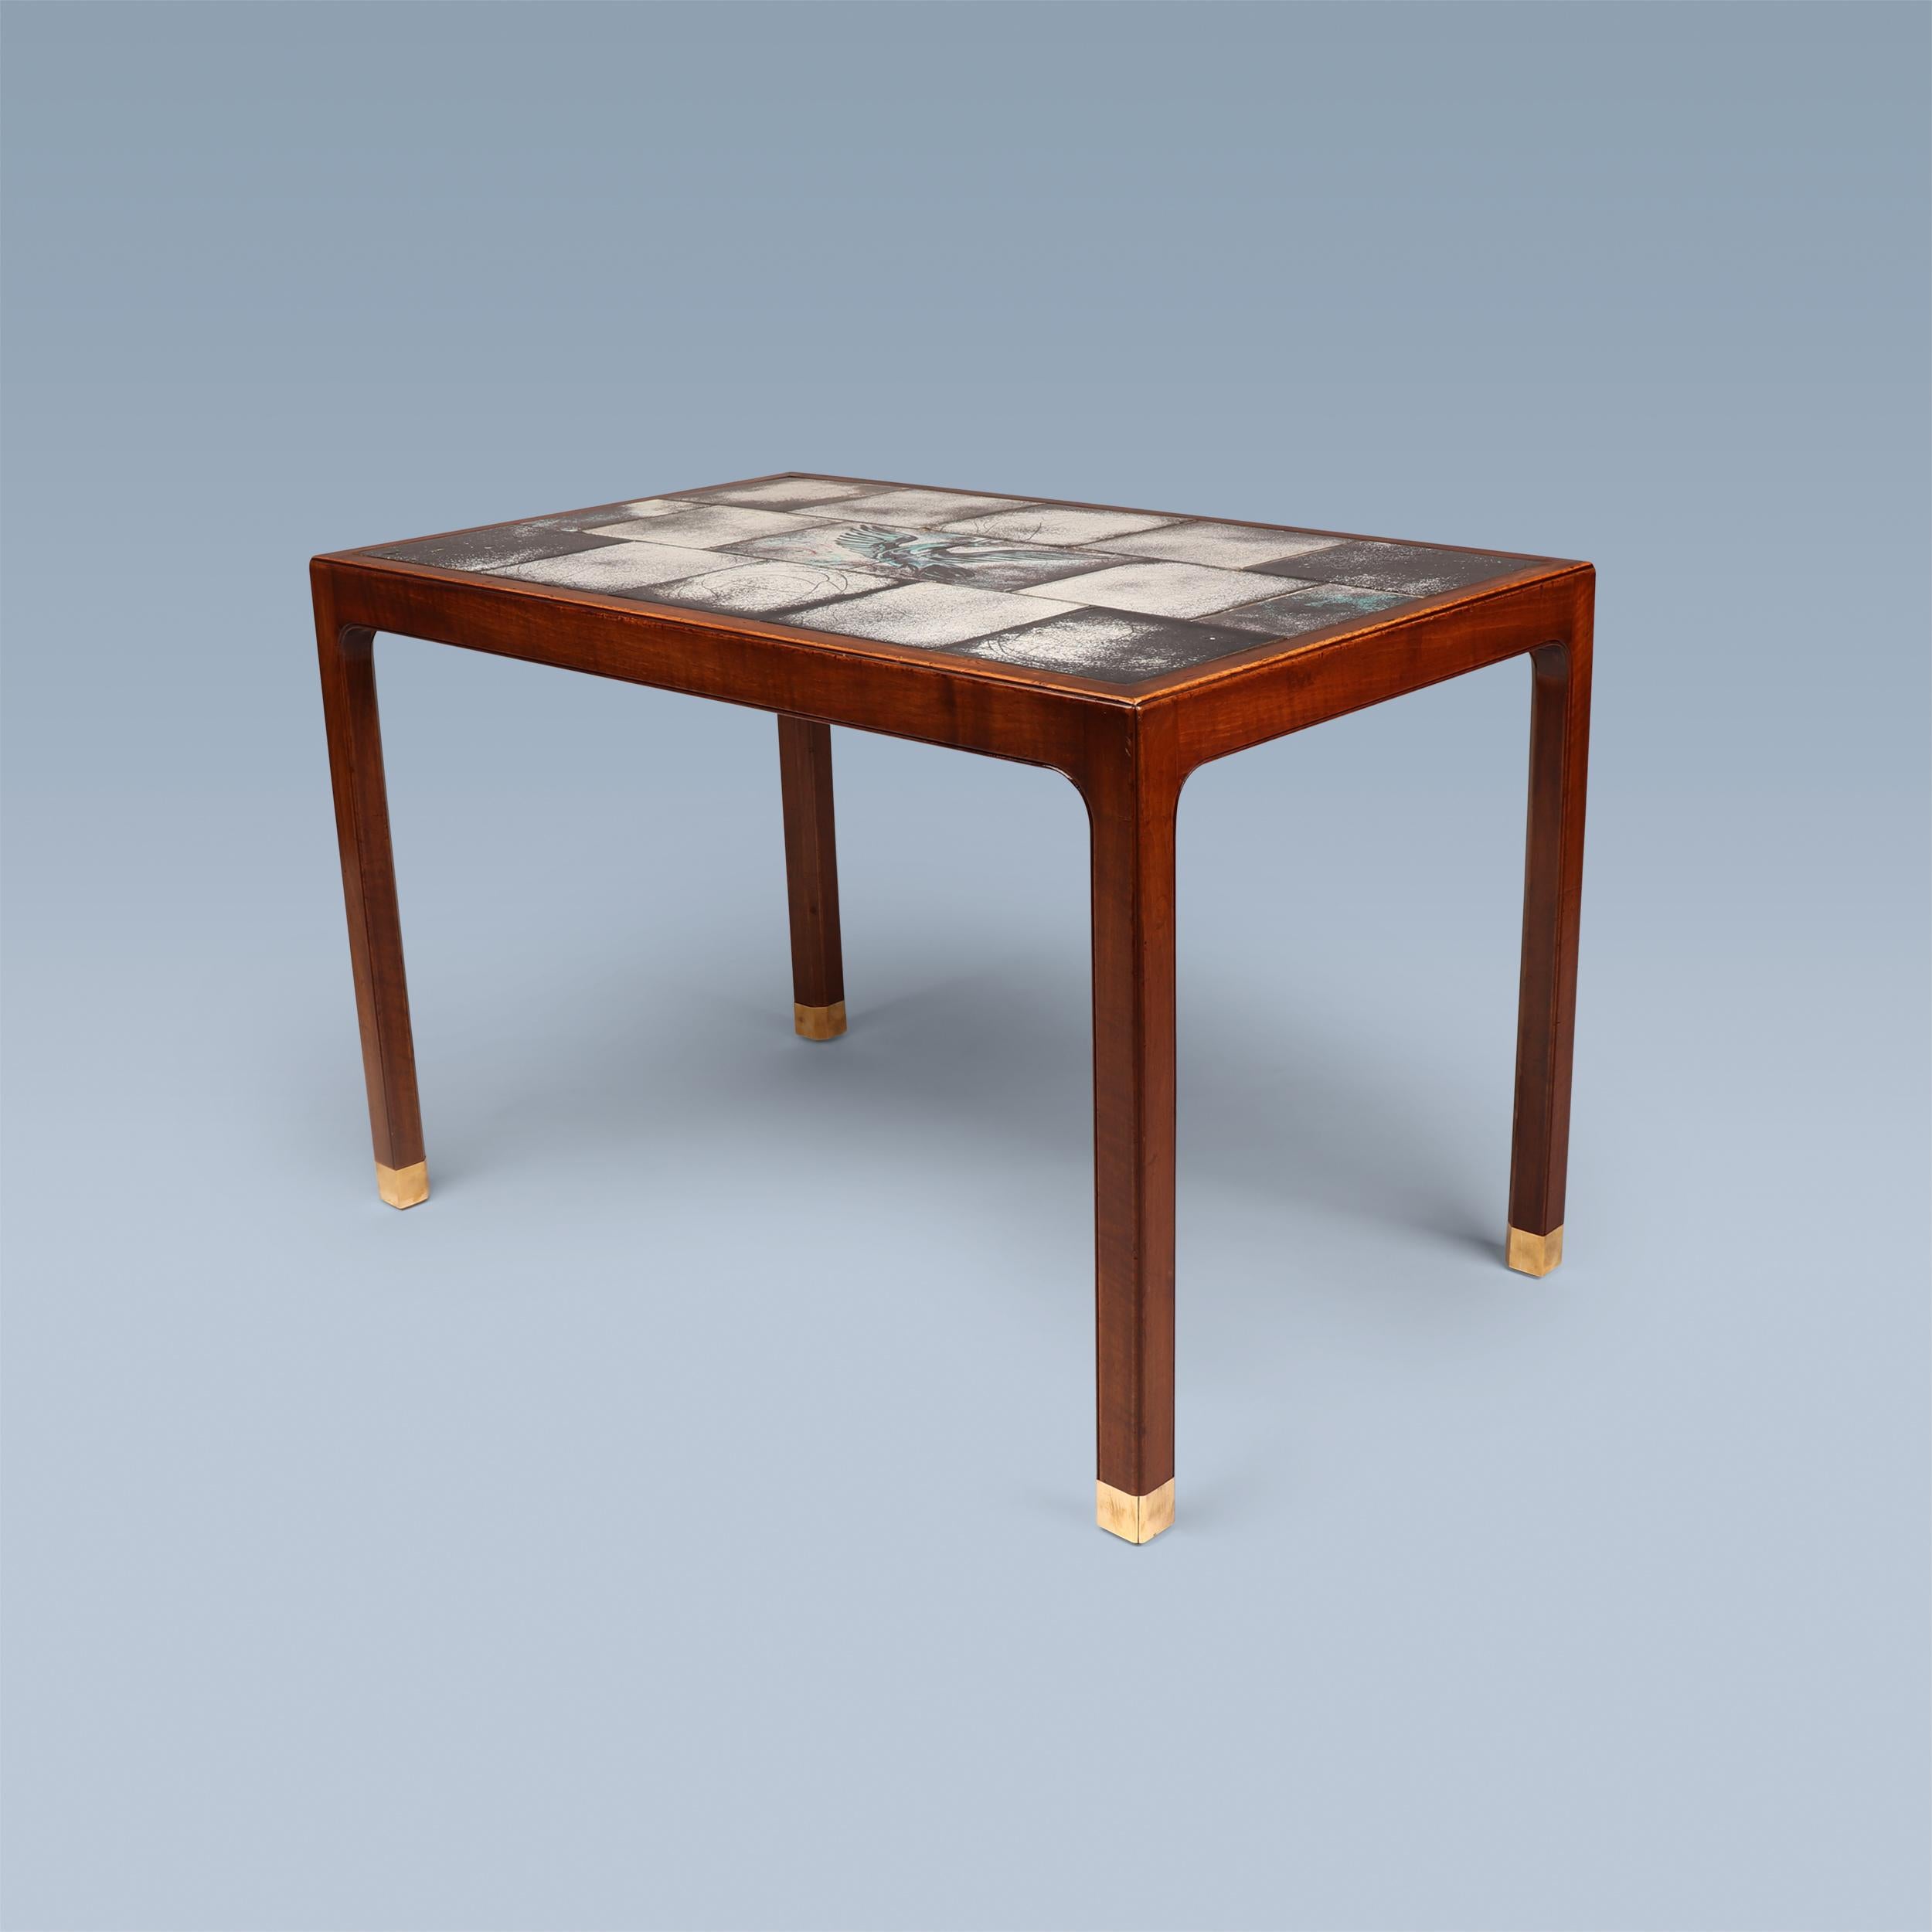 Scandinavian Modern Coffee table with black/white inlaid tiles, turquoise details and brass feet. For Sale